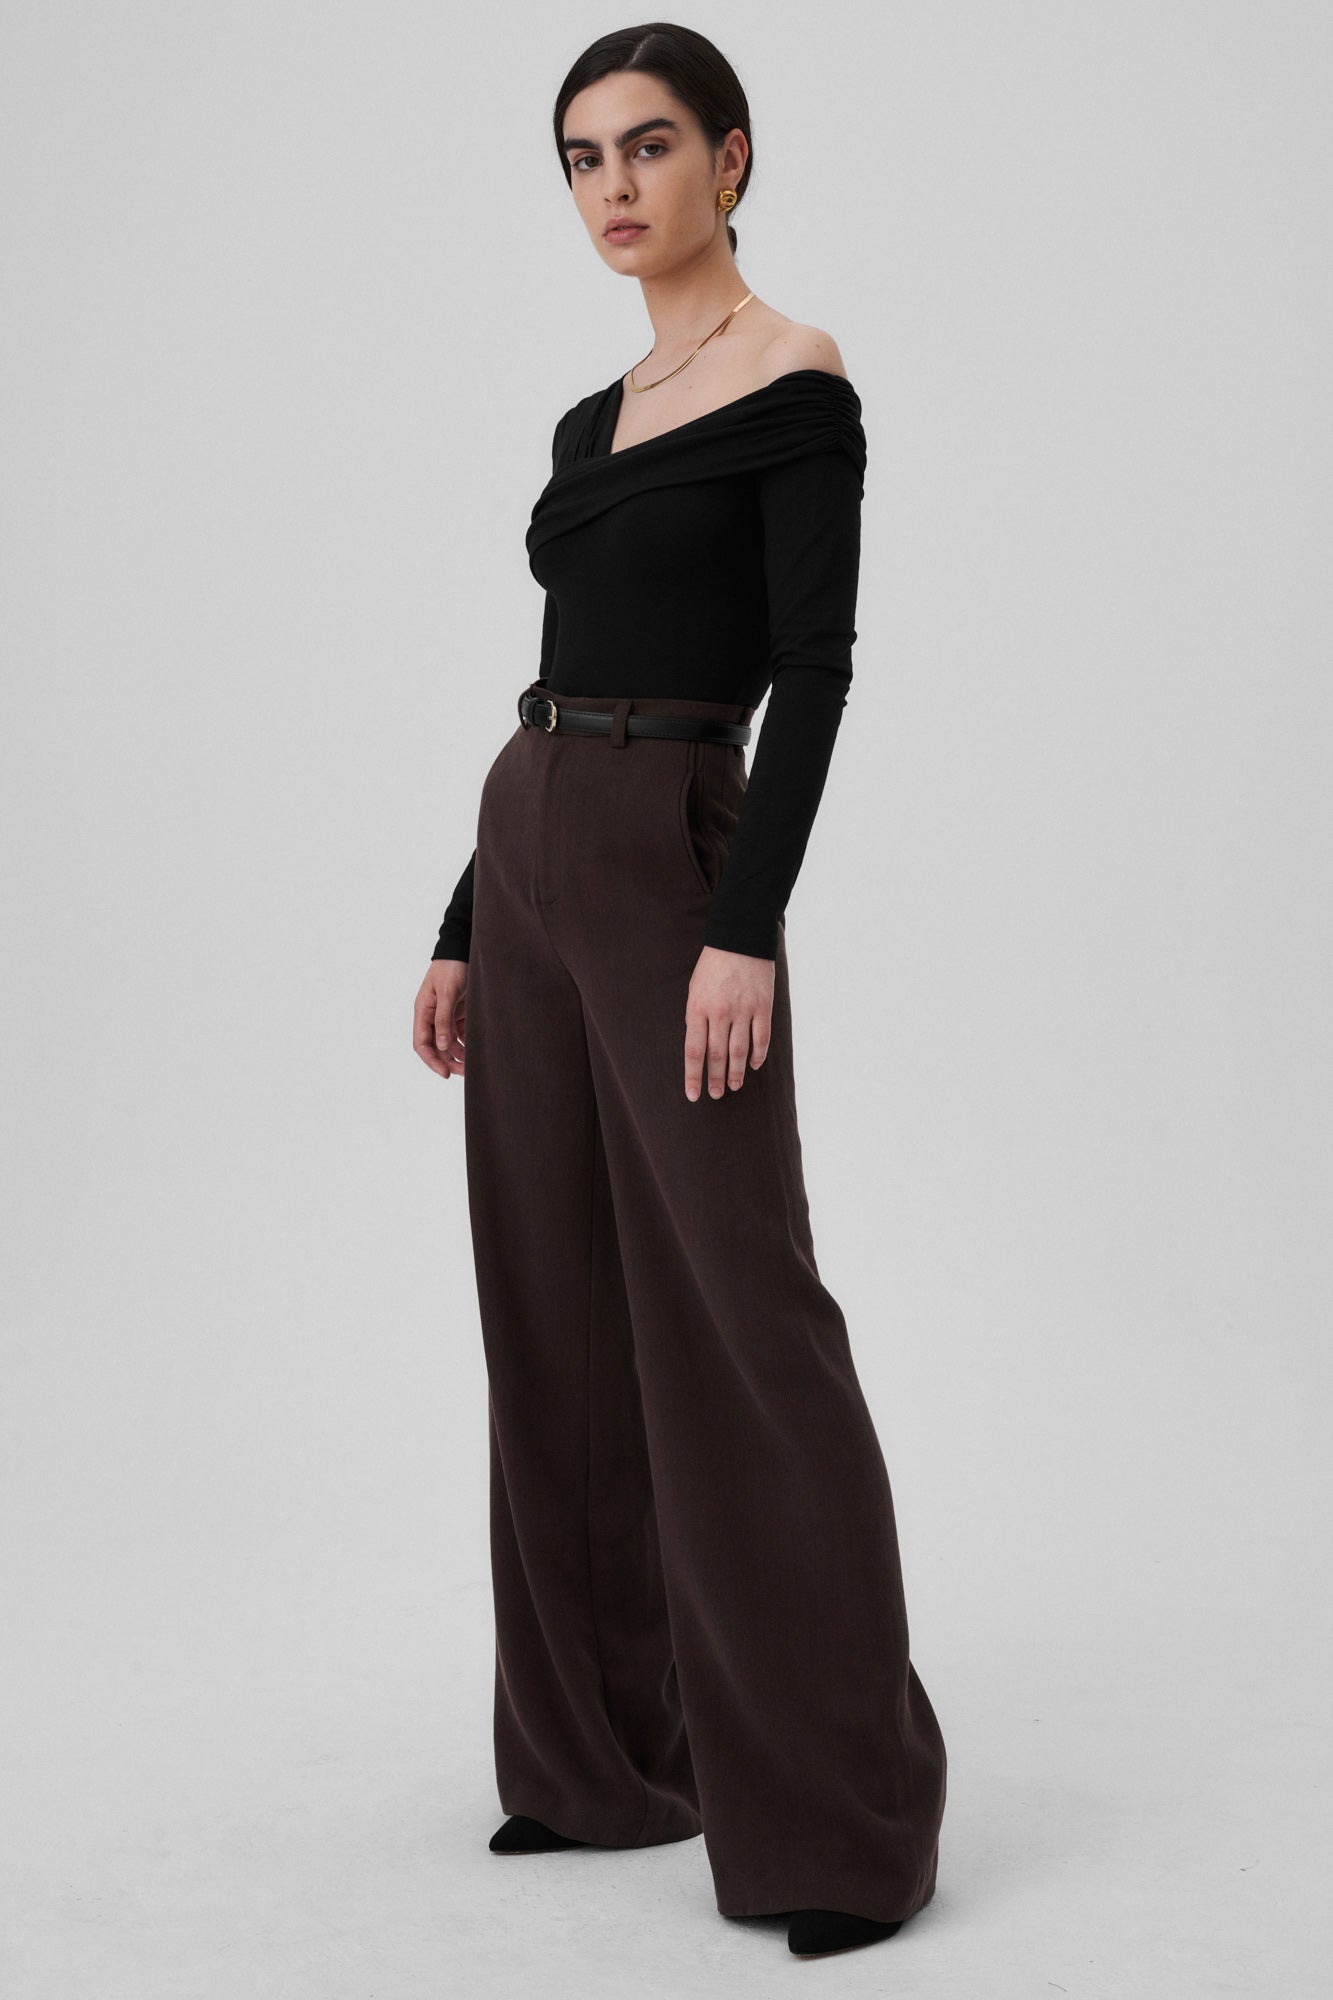 Tencel™ trousers / 05 / 05 / dark chocolate *bodysuit-in-organic-cotton-01-26-onyx-black* ?The model is 172cm tall and wears size XS? |